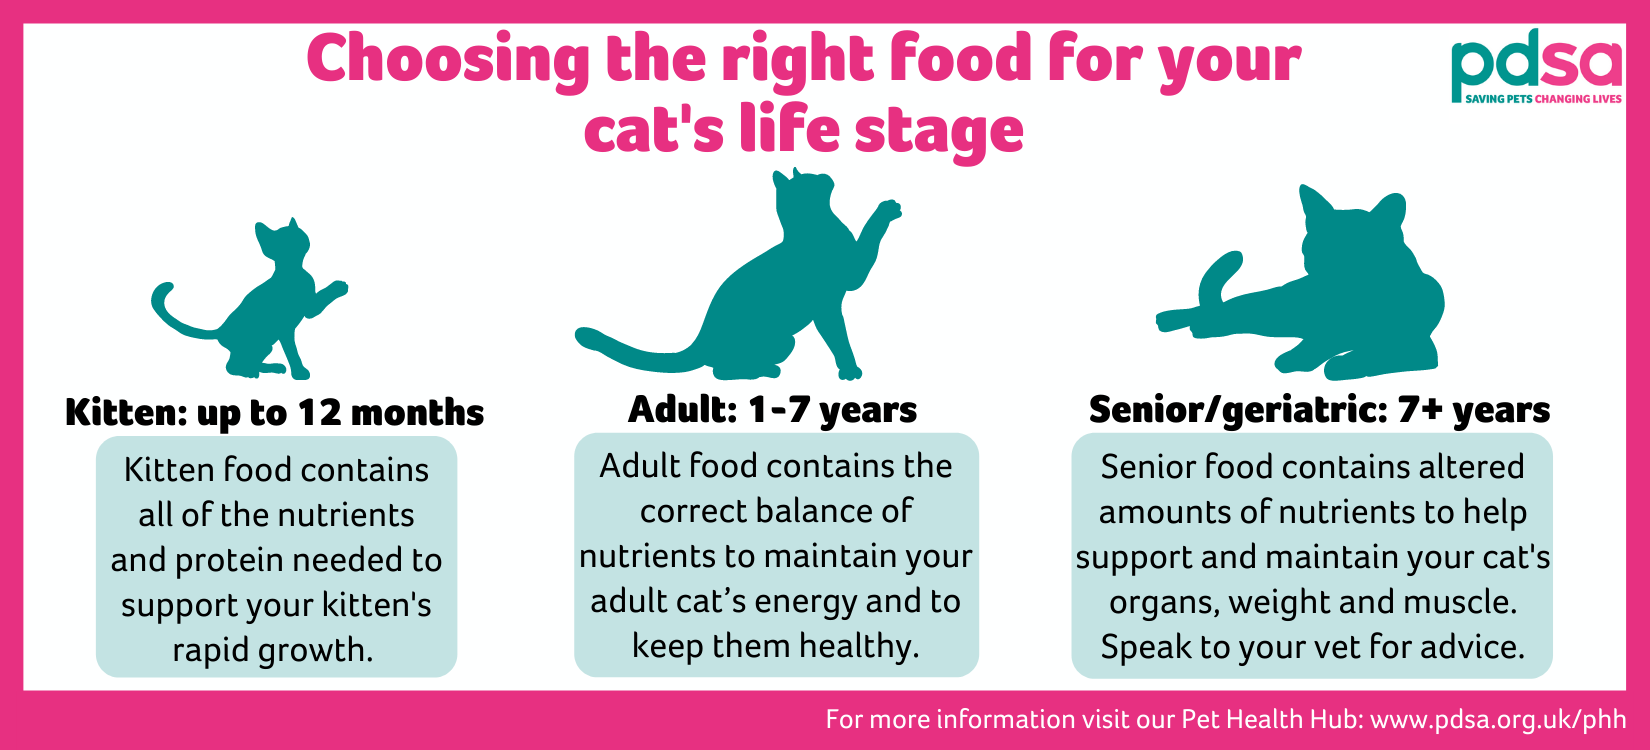 Choosing the right food for you cat's life stage infographic